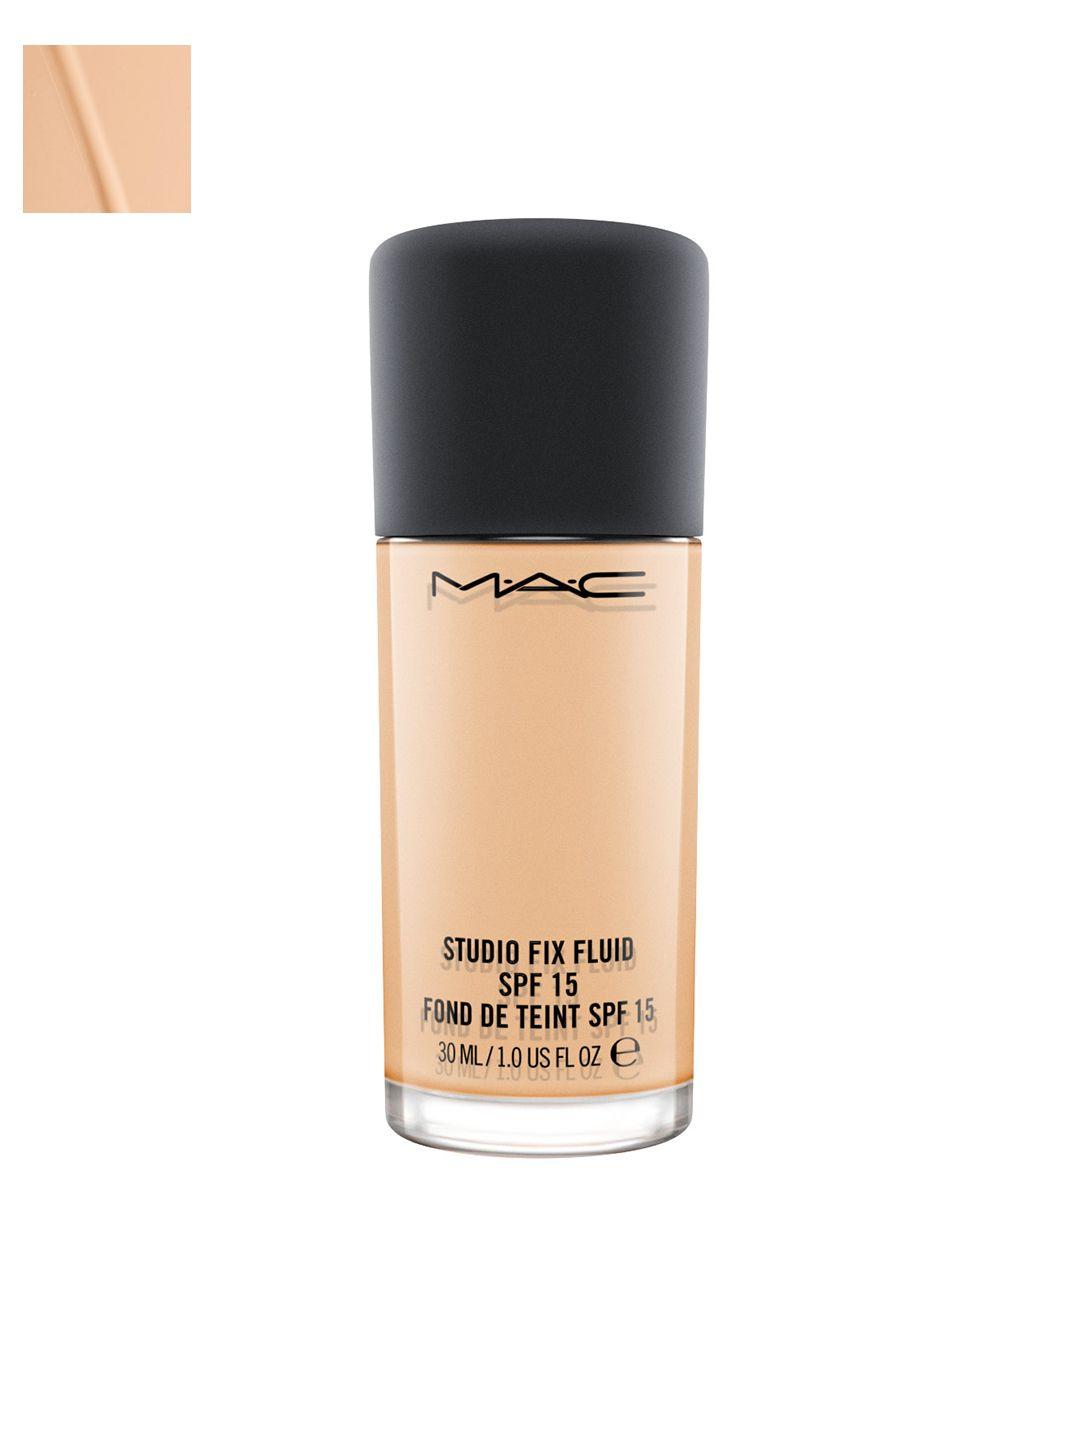 m.a.c studio fix fluid broad spectrum foundation with spf 15 - nw6 30 ml